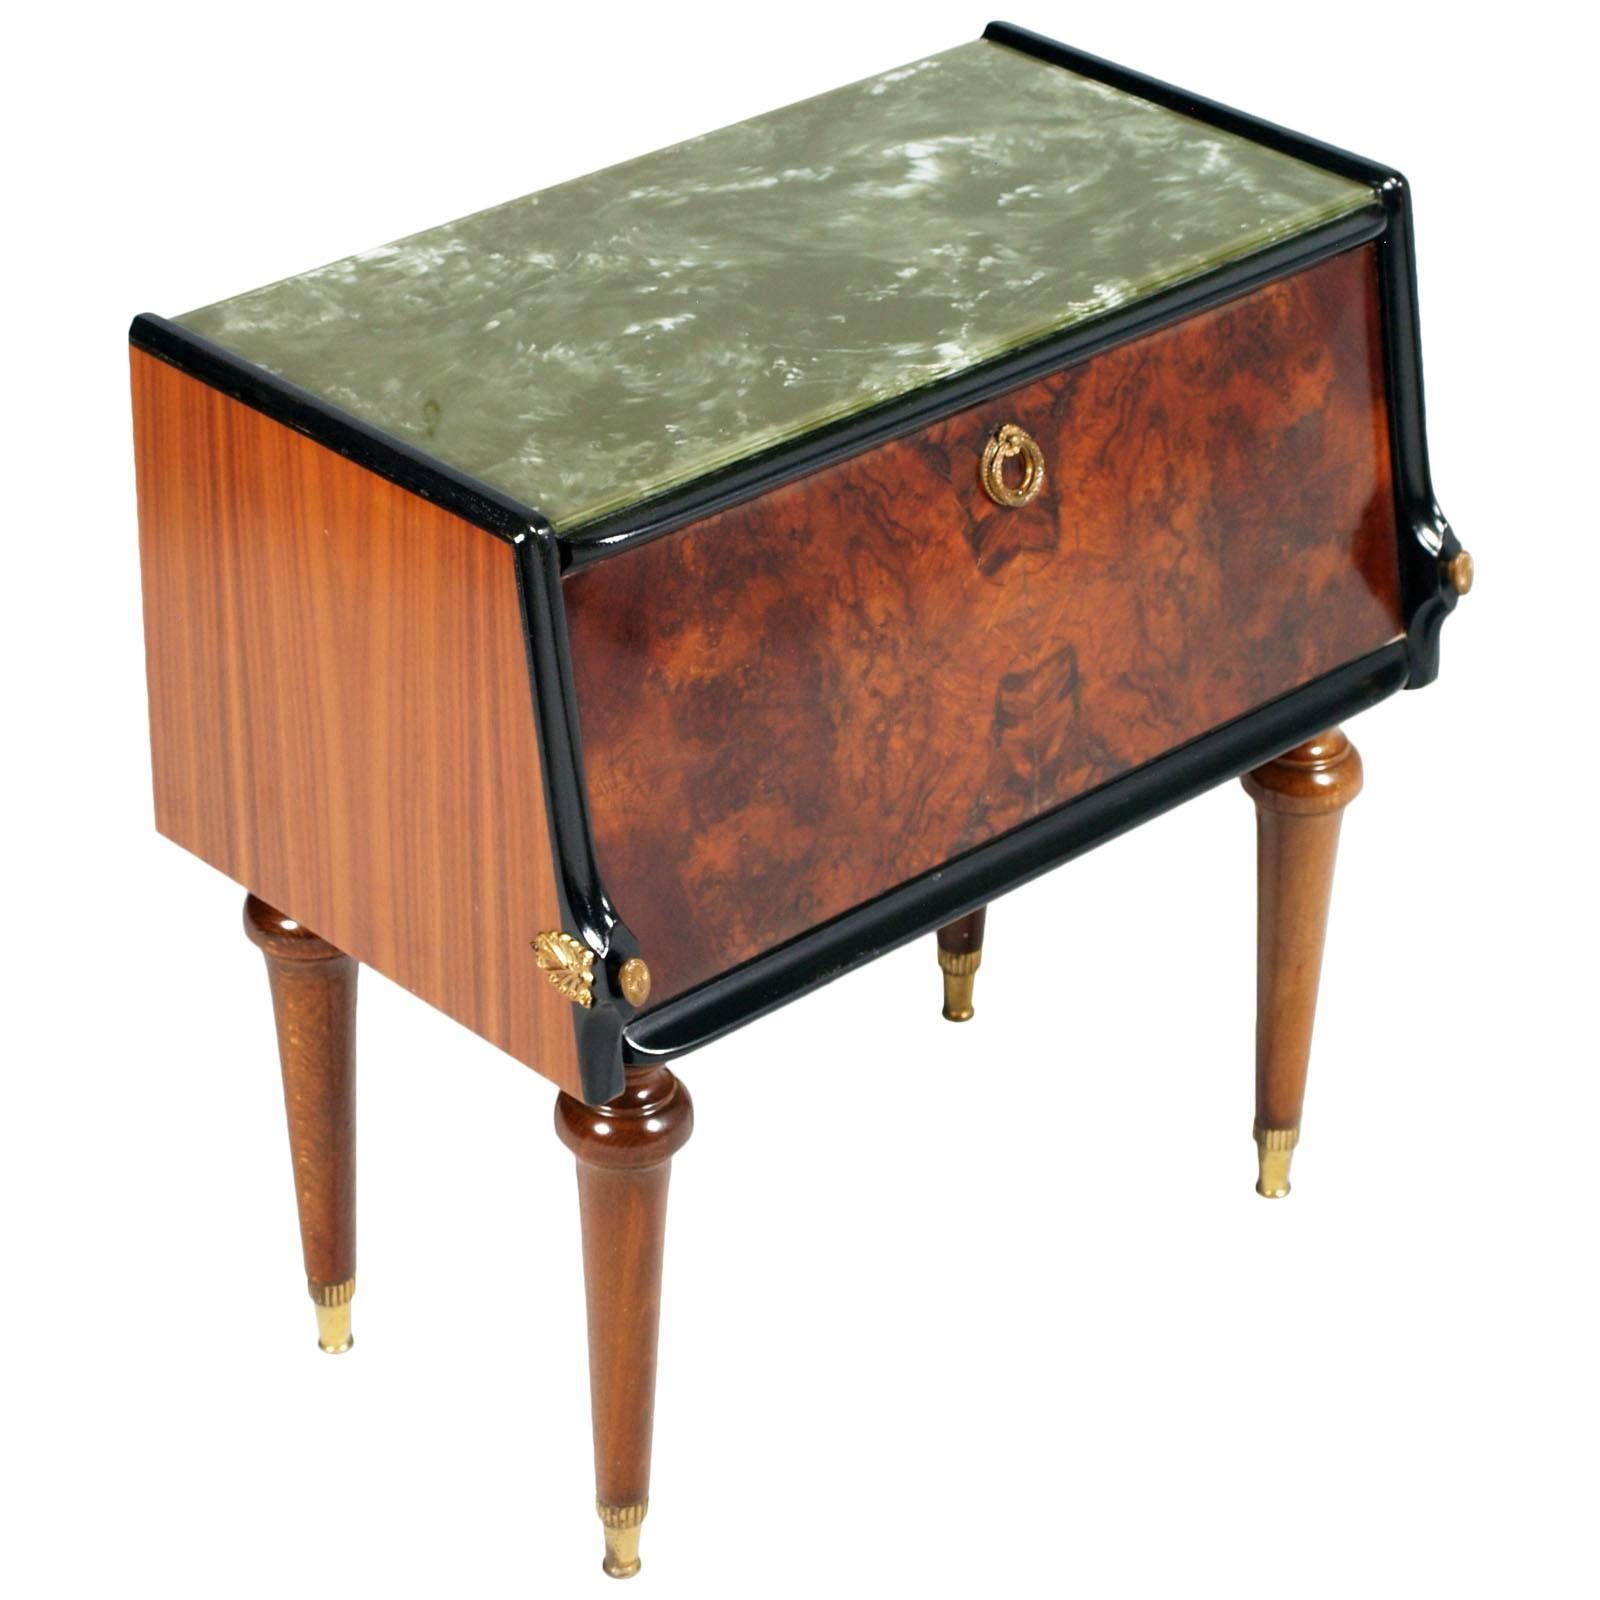 Fabulous pair of Art Deco burl walnut and mahogany bedside tables, with top glass decorated green marble effect, cream-colored interior veneer.
Golden brass feet
Excellent condition, only treated with wax.

Measures cm: D 34, W 55, H 56.